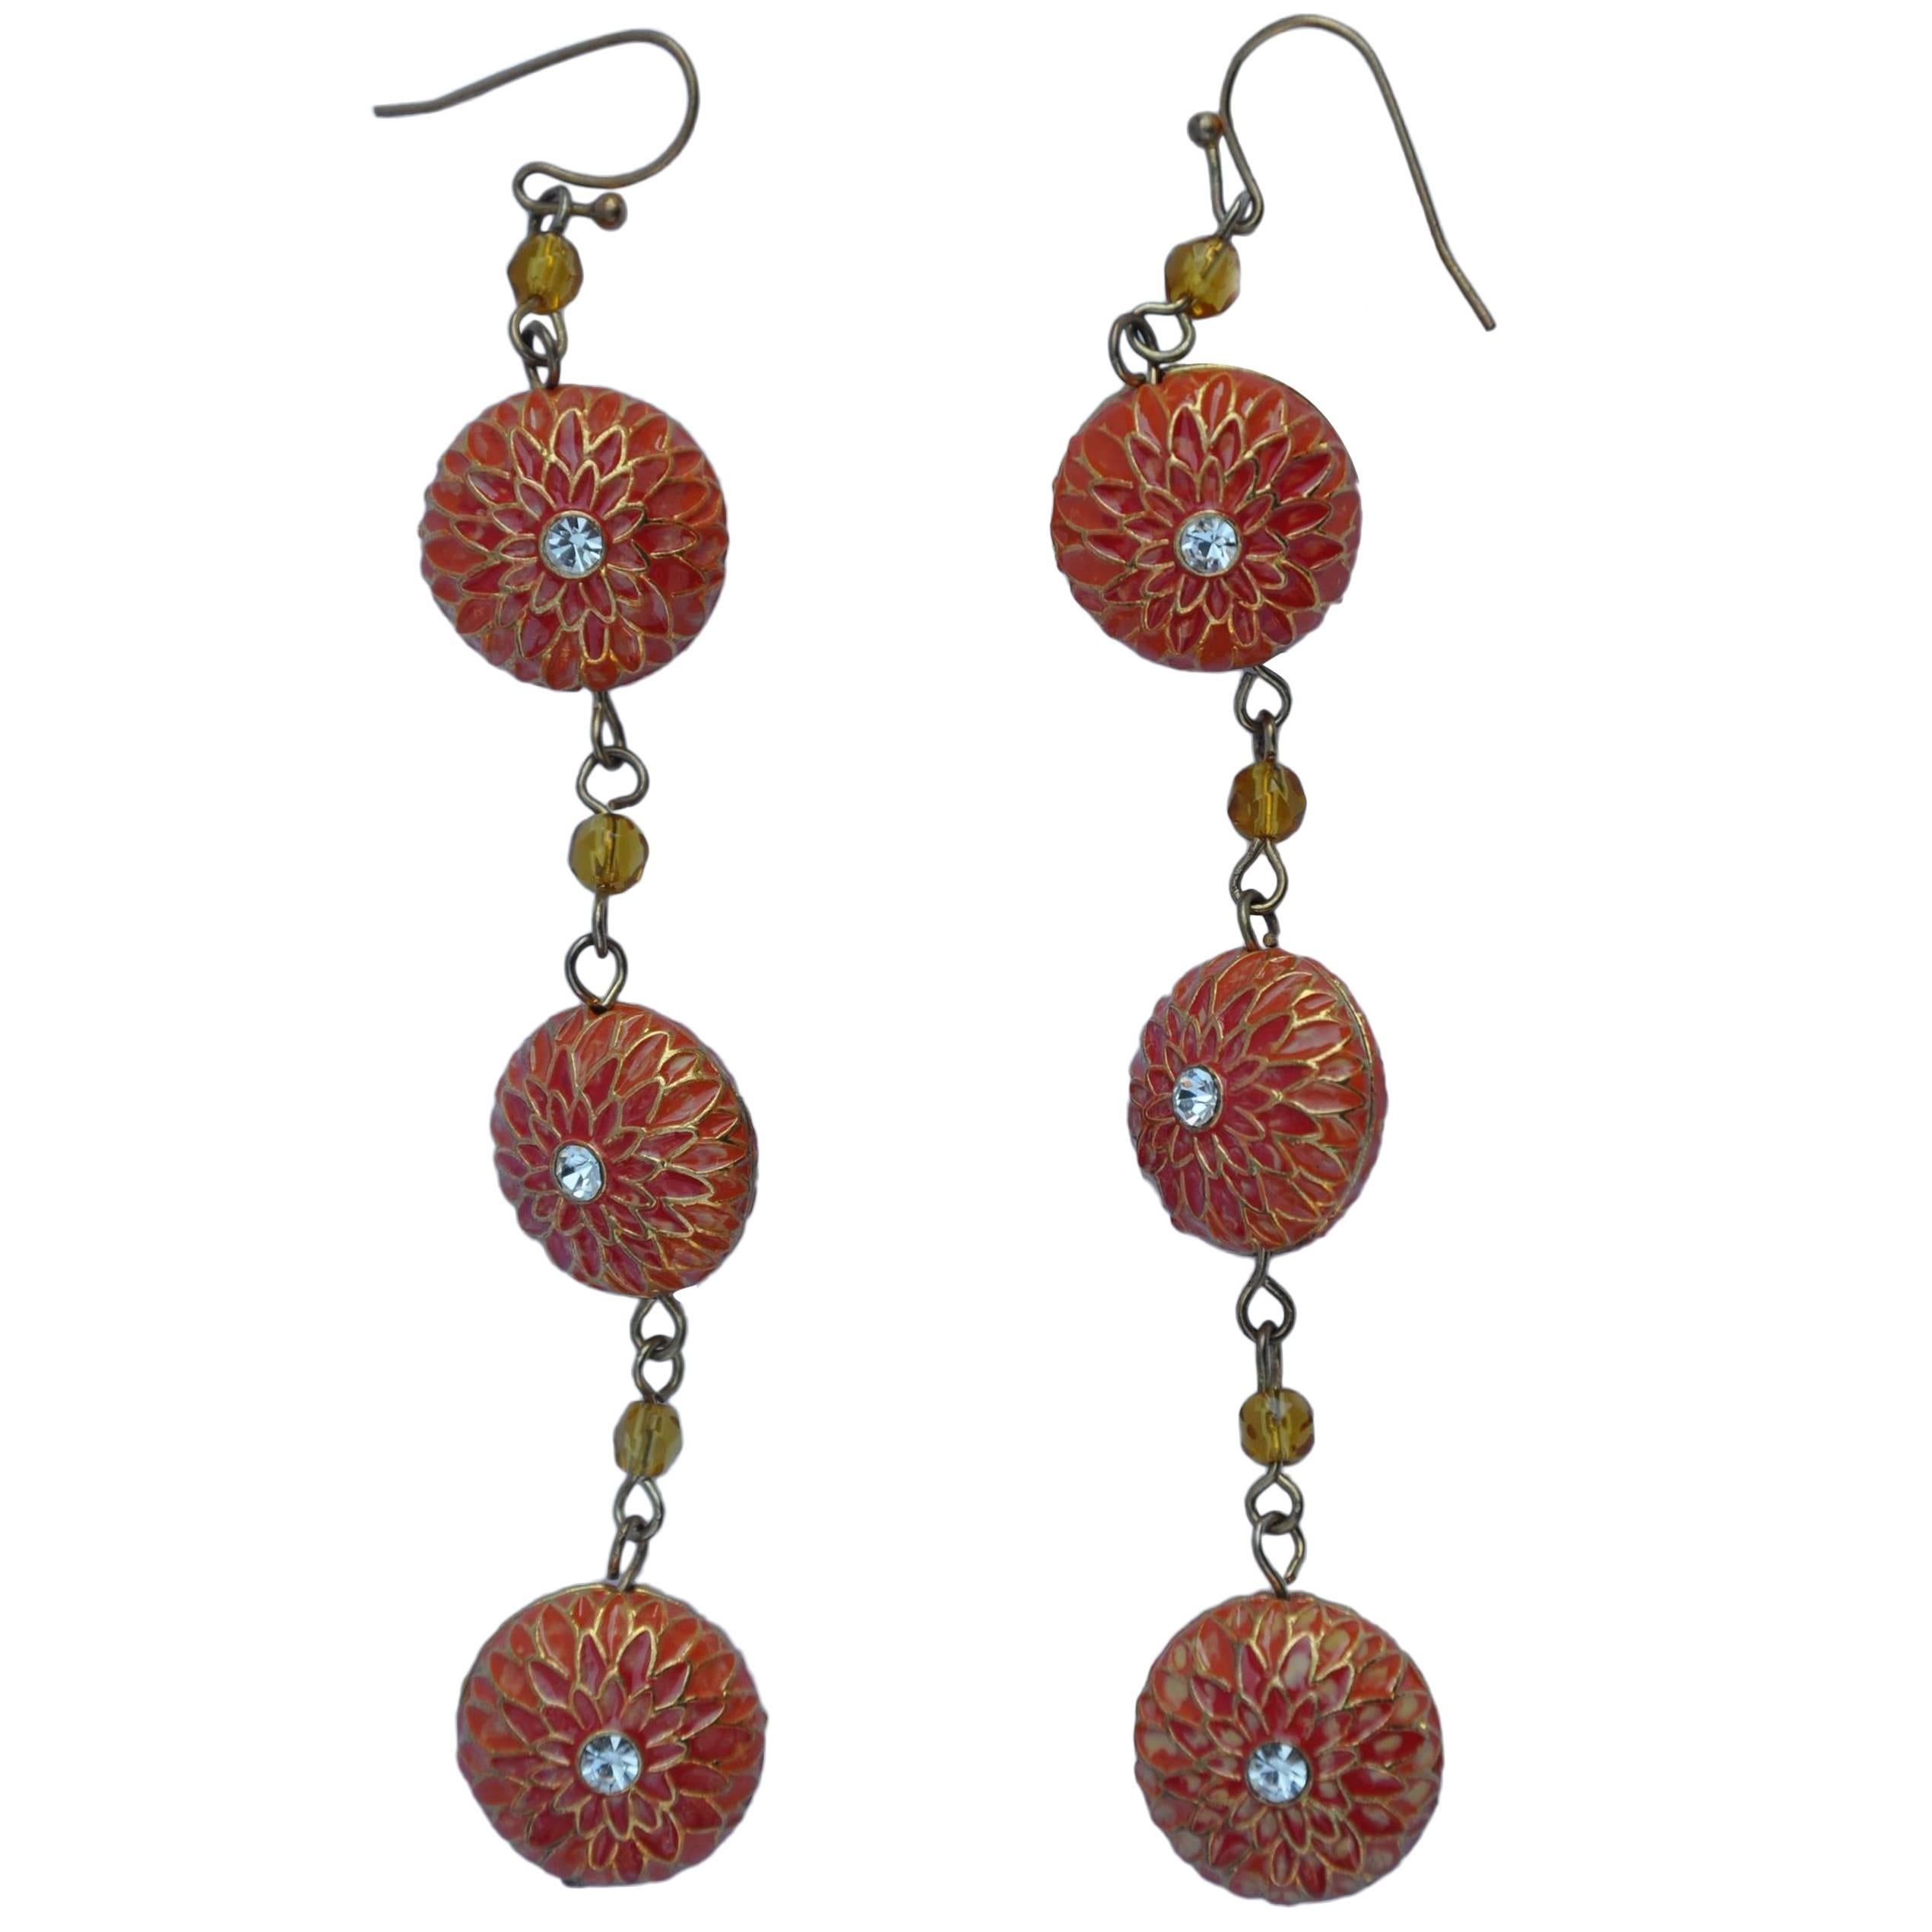 Detailed Coral & Red Enamel with Gold Hardware Hanging Earrings